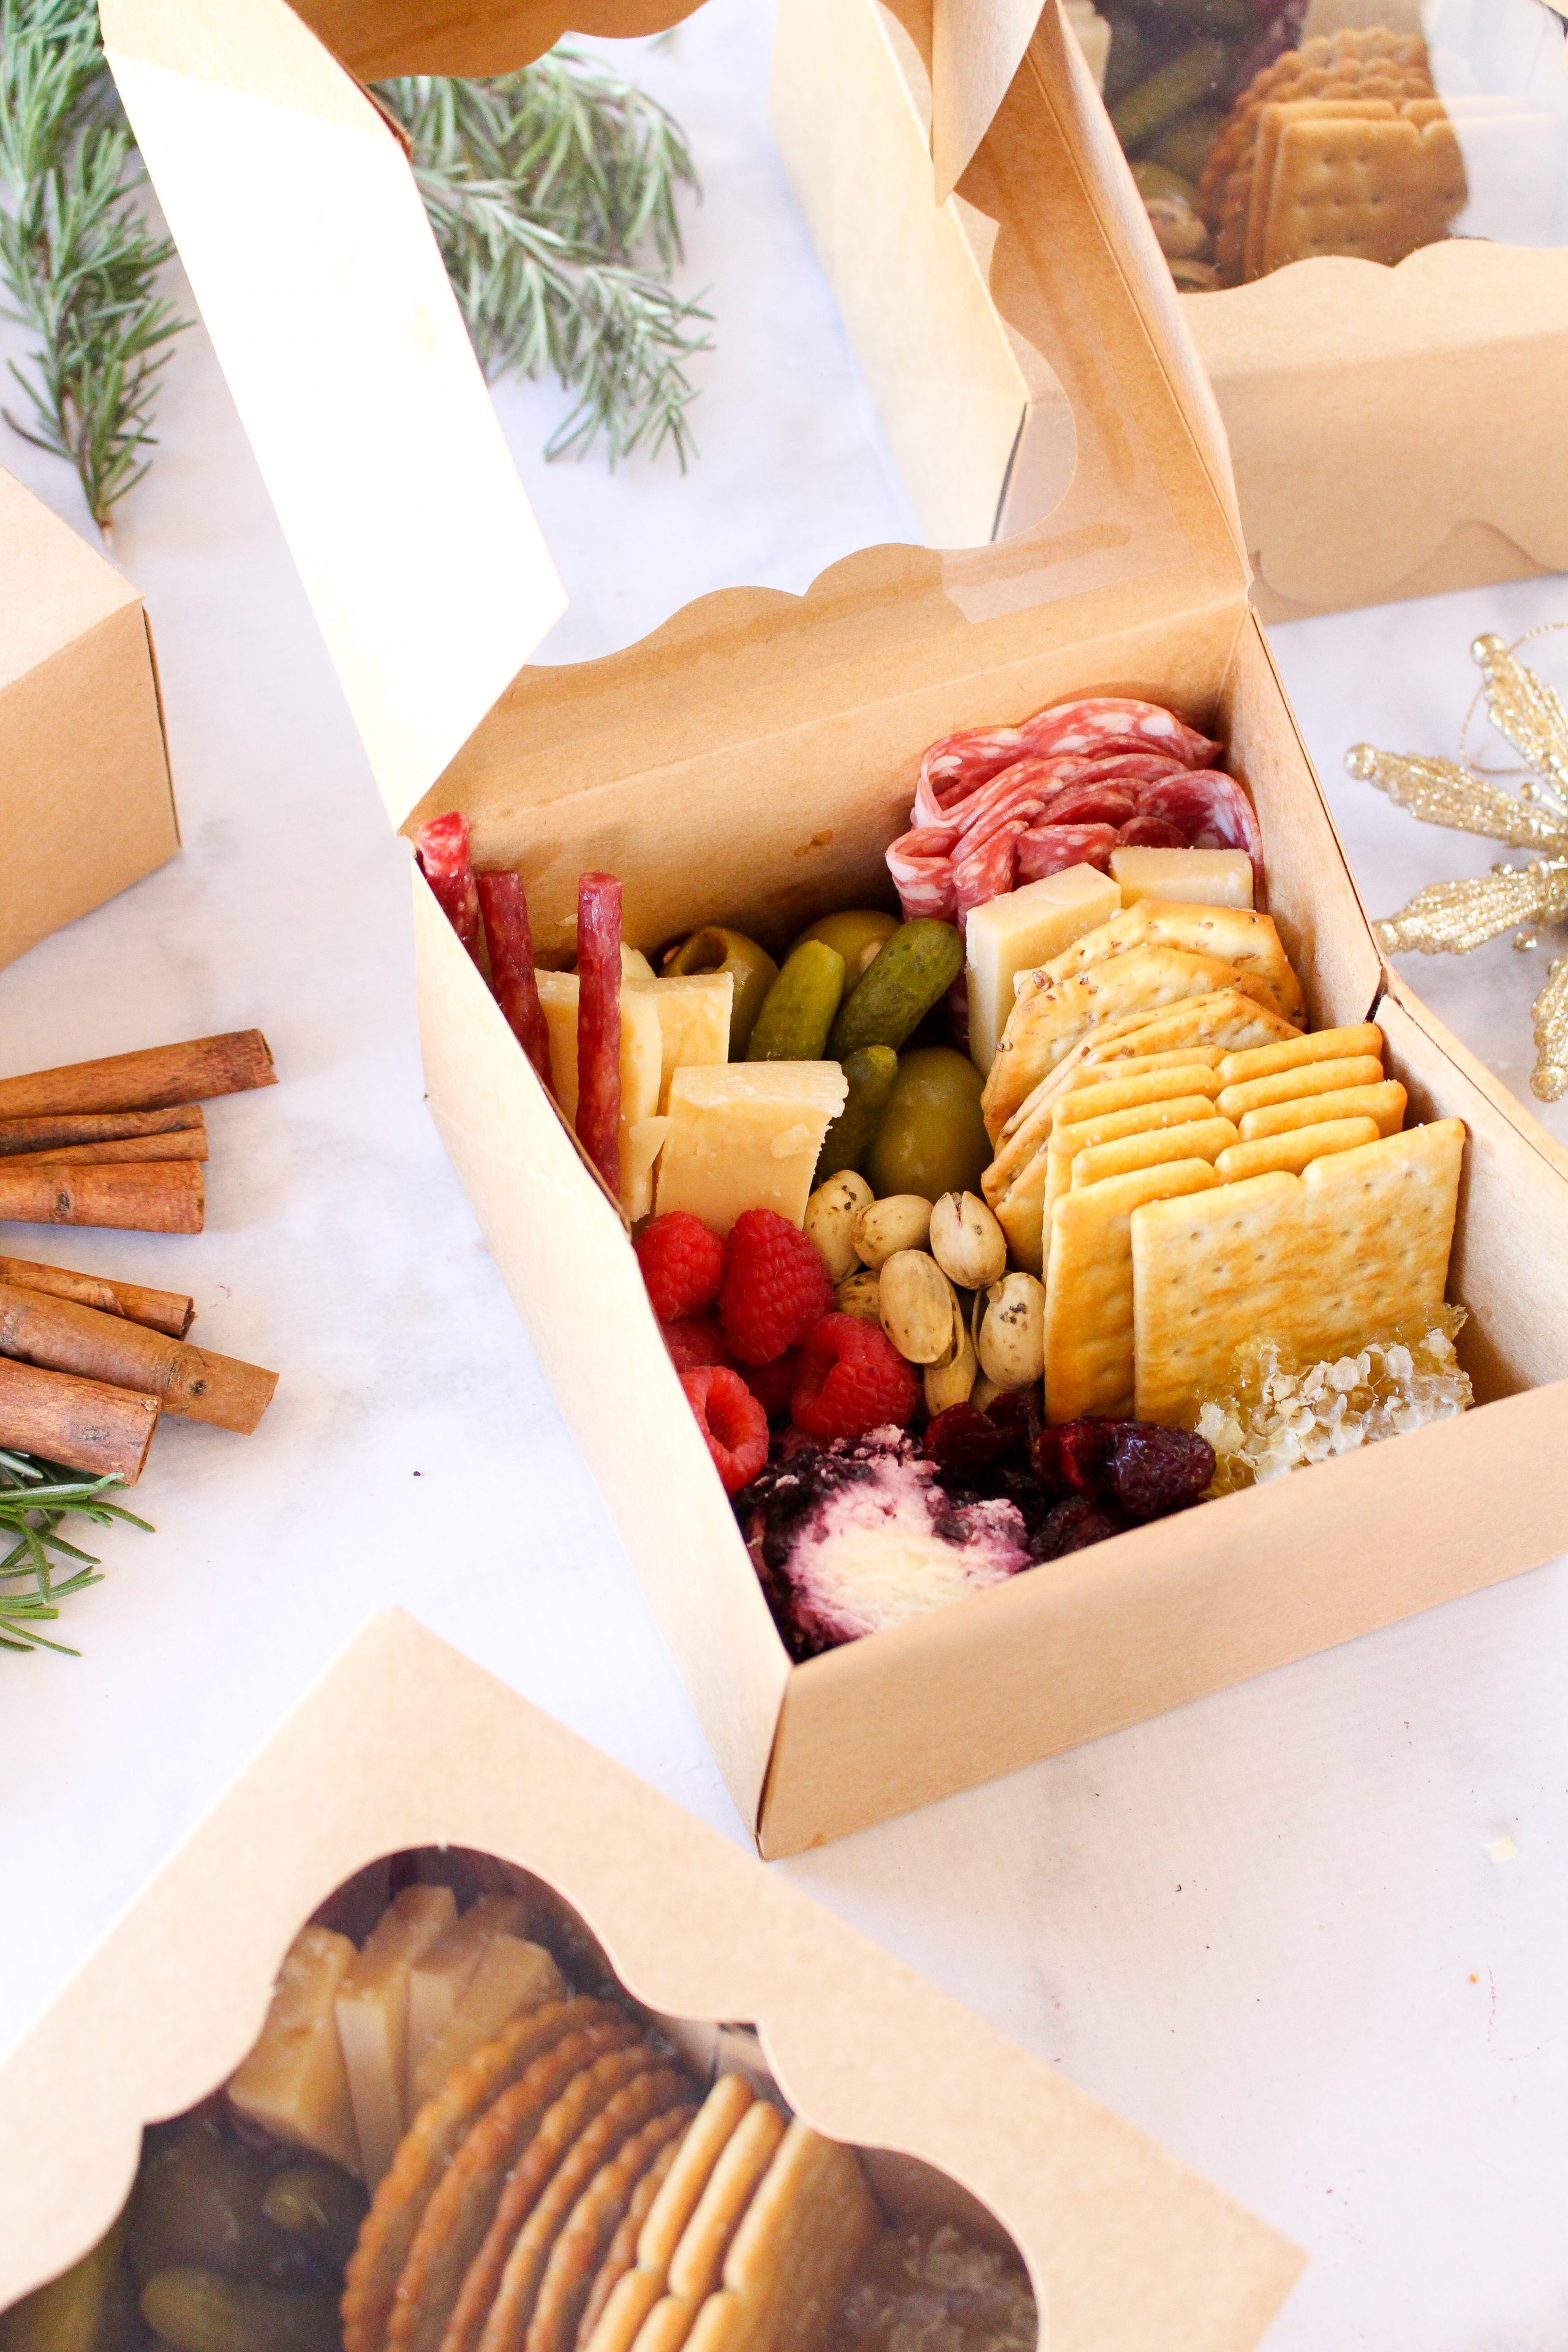 How to Create Mini Graze Boxes with Tips & Supply Resources